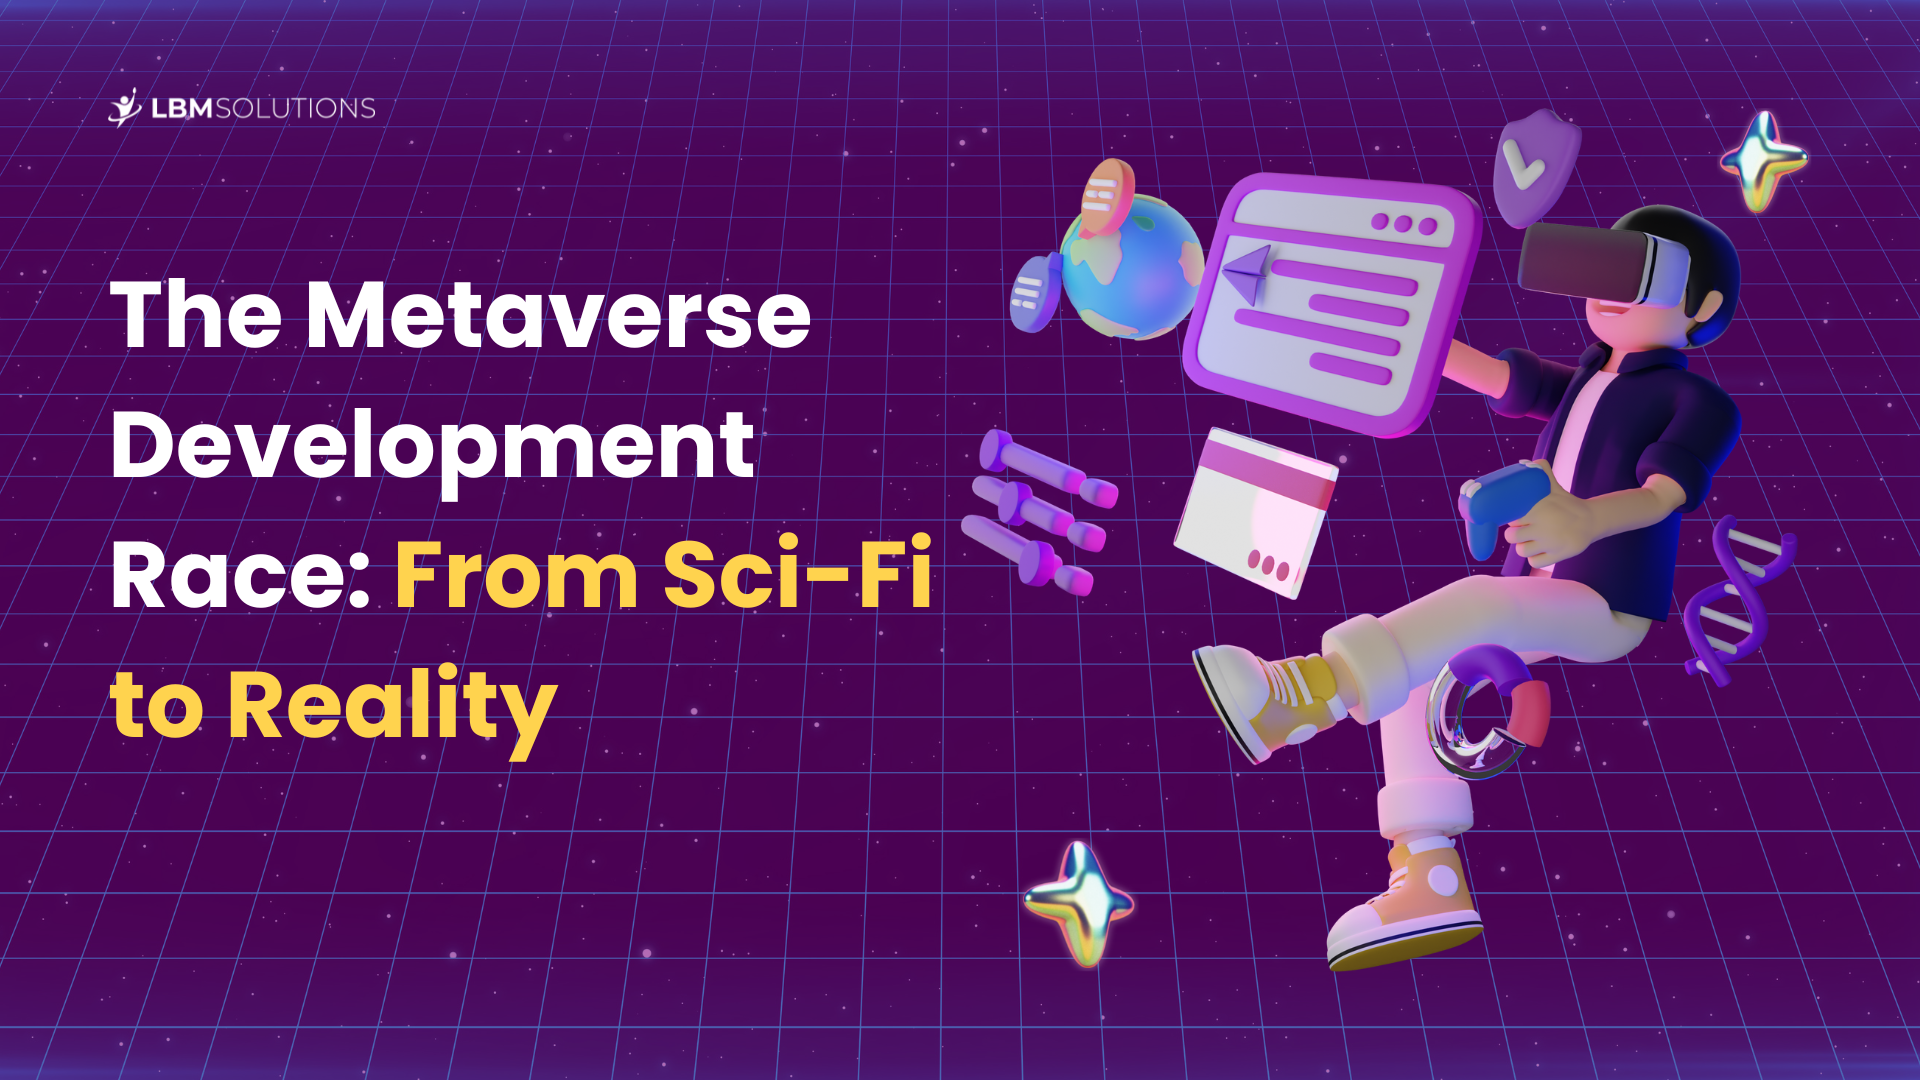 The Metaverse Development Race: From Sci-Fi to Reality